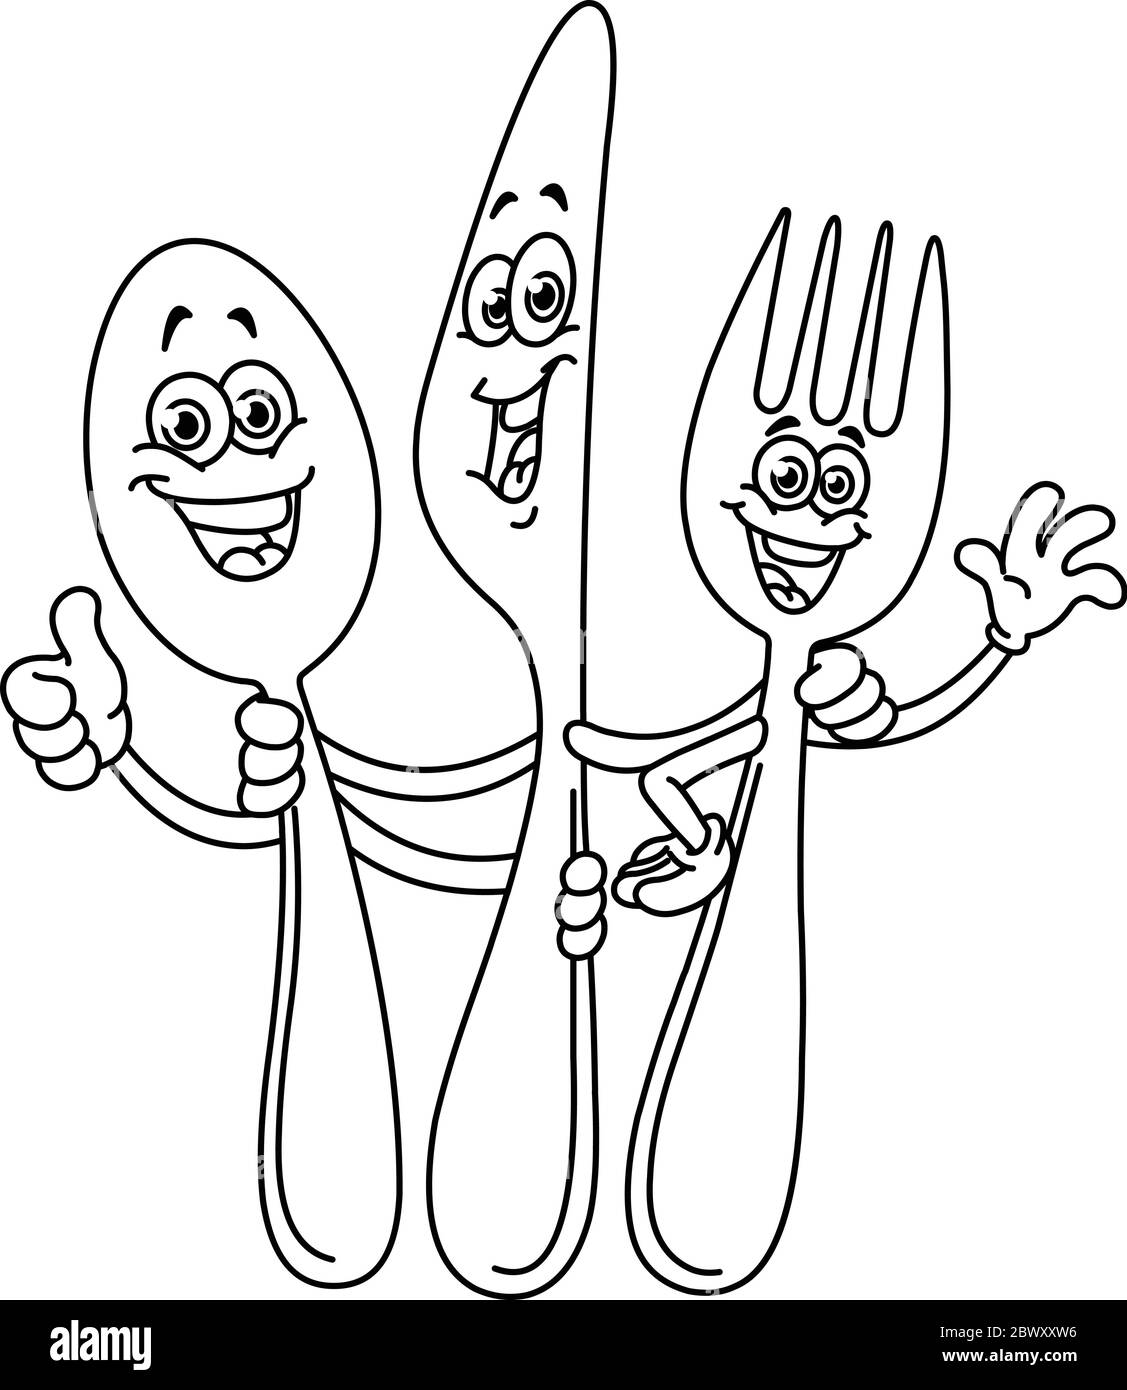 Outlined happy cartoon silverware, spoon knife and fork. Vector line art illustration coloring page. Stock Vector